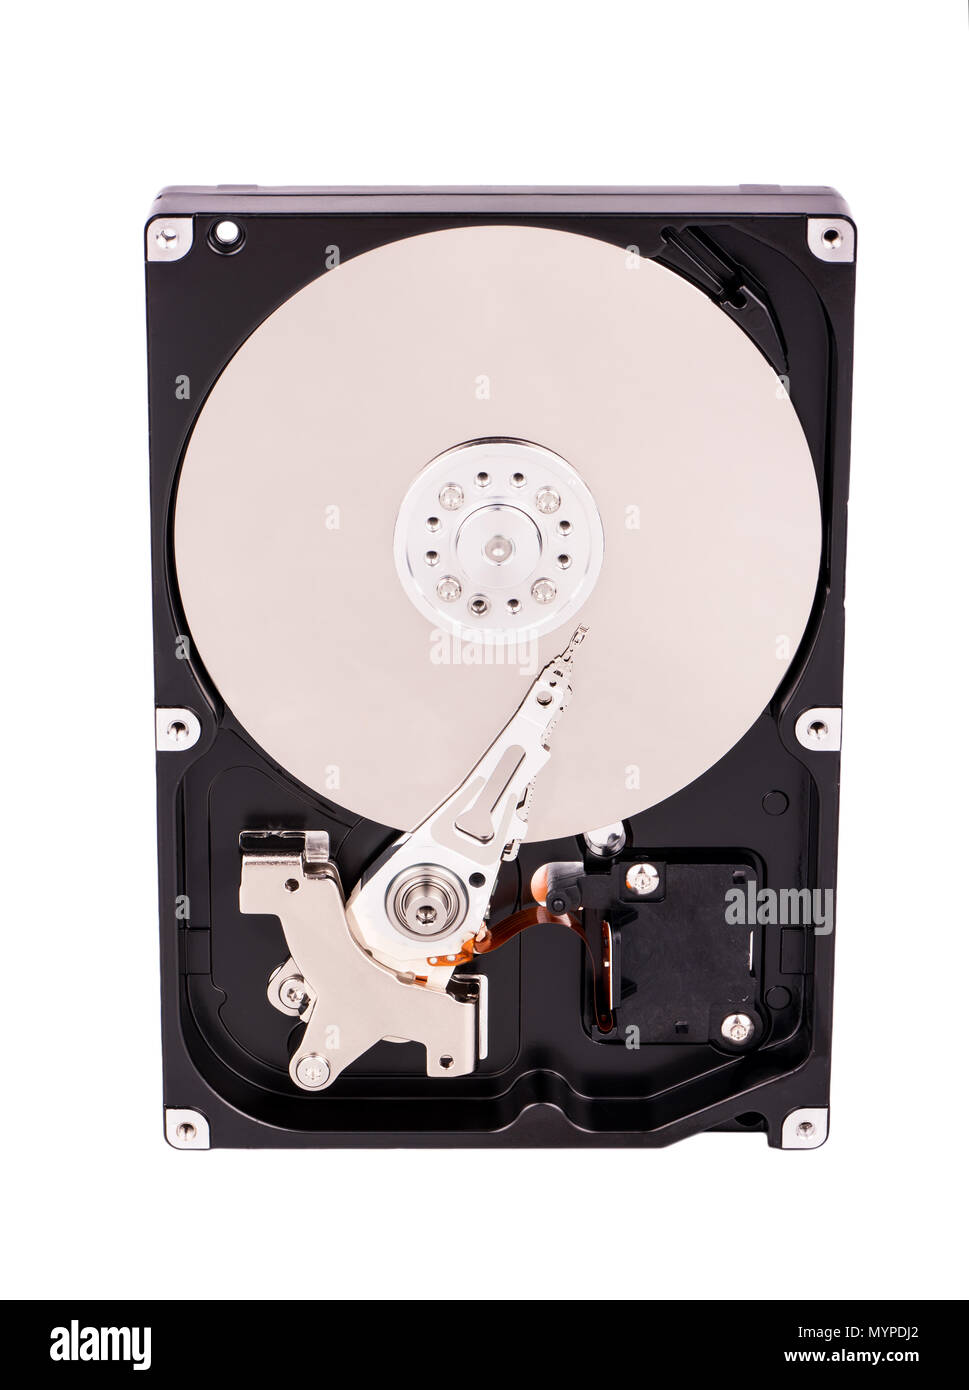 Open hard disk drive (HDD) isolated on white background Stock Photo - Alamy